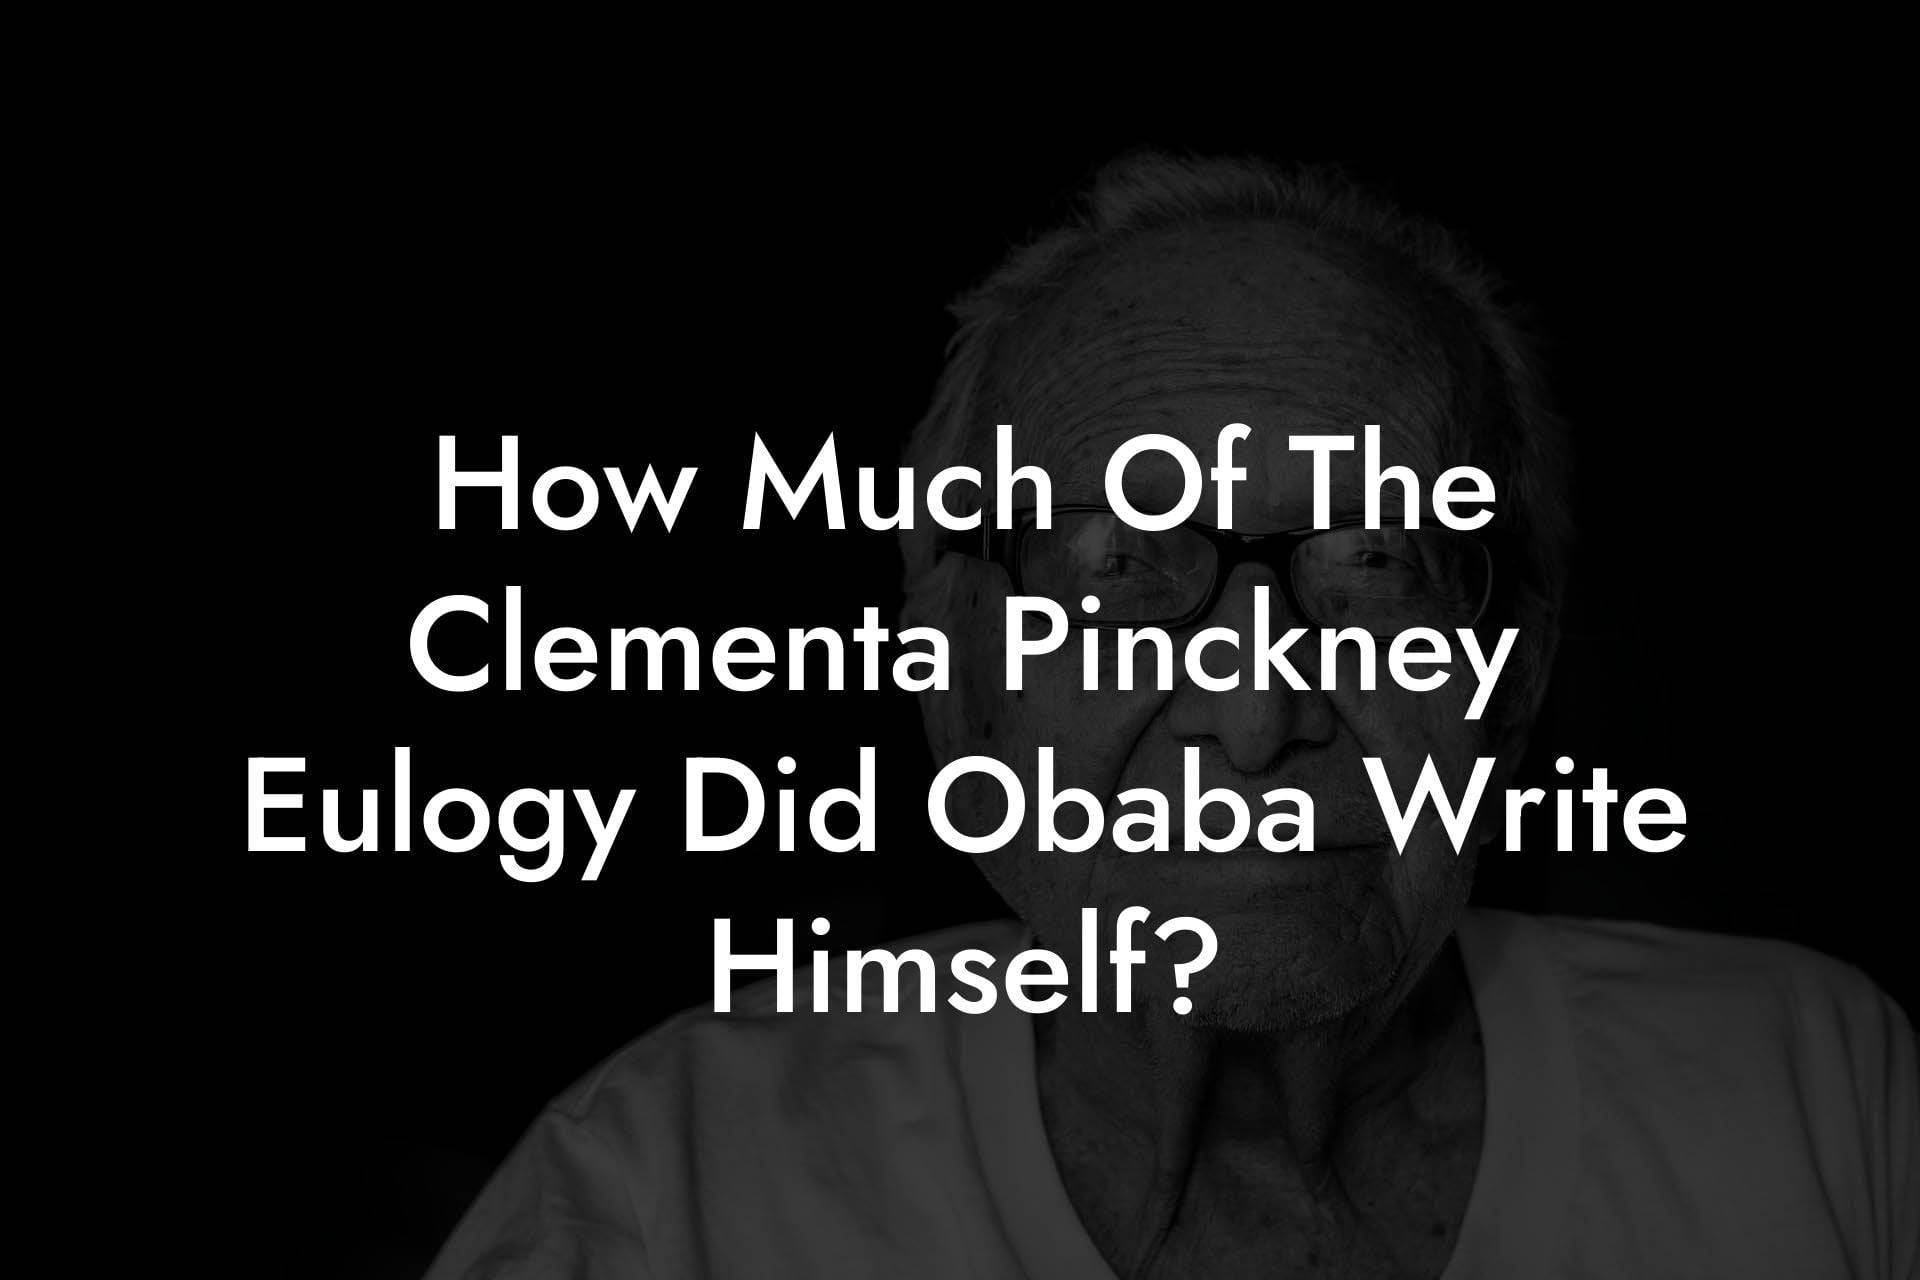 How Much Of The Clementa Pinckney Eulogy Did Obaba Write Himself?